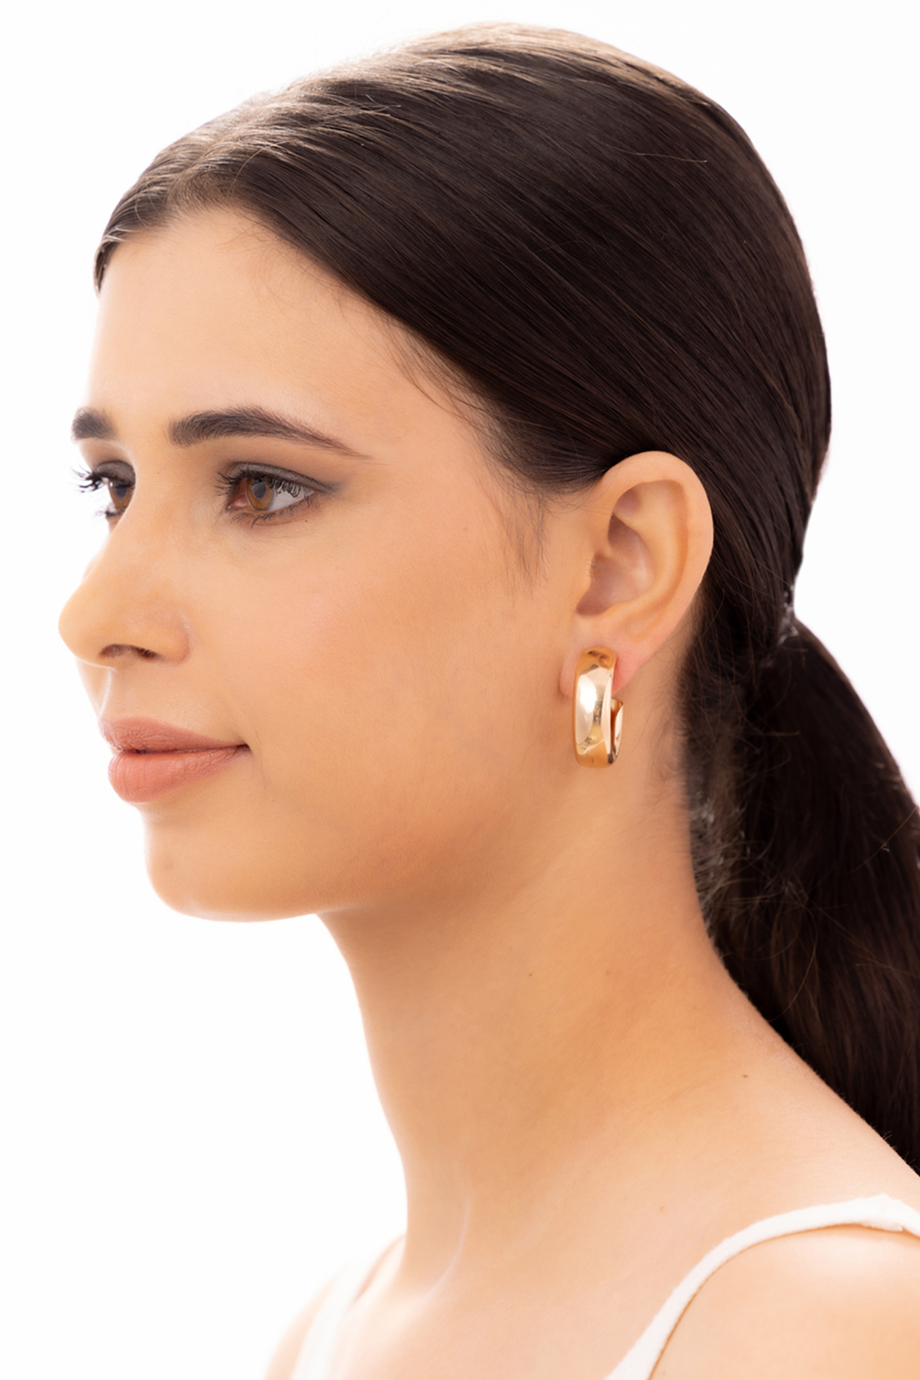 Designer Gold Gold Diamond Hoop Earrings Stud Earrings For Women And Men F  Luxury Hoops With Letter Design, Small Size 2.5 Cm Fashion Jewelry With Box  V89X From Earringscs, $9.14 | DHgate.Com